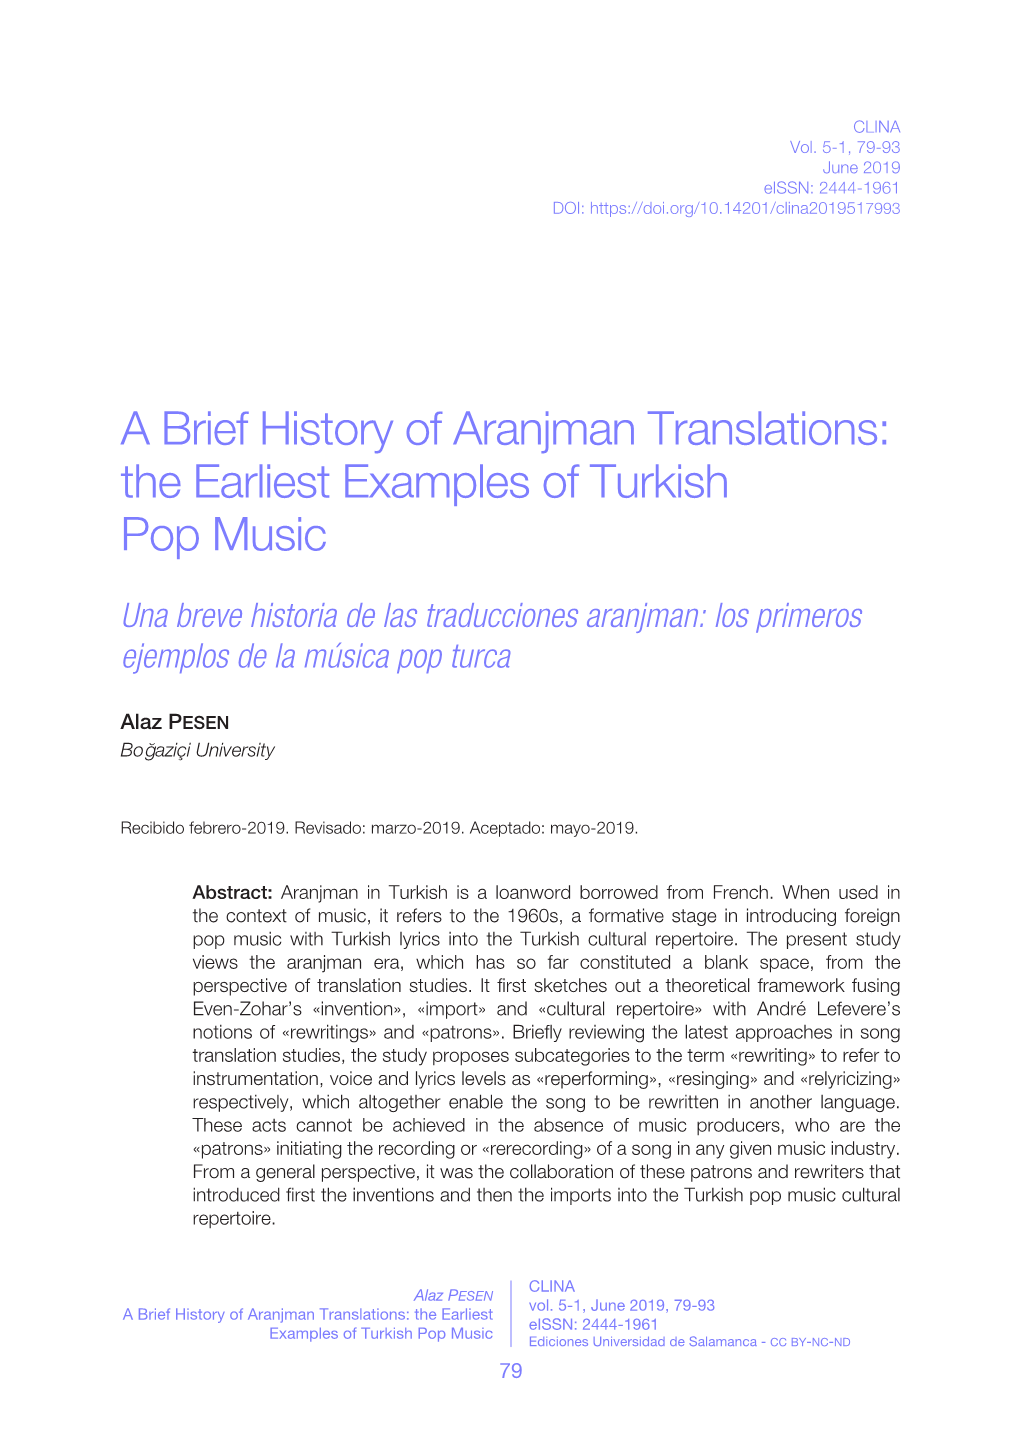 A Brief History of Aranjman Translations: the Earliest Examples of Turkish Pop Music